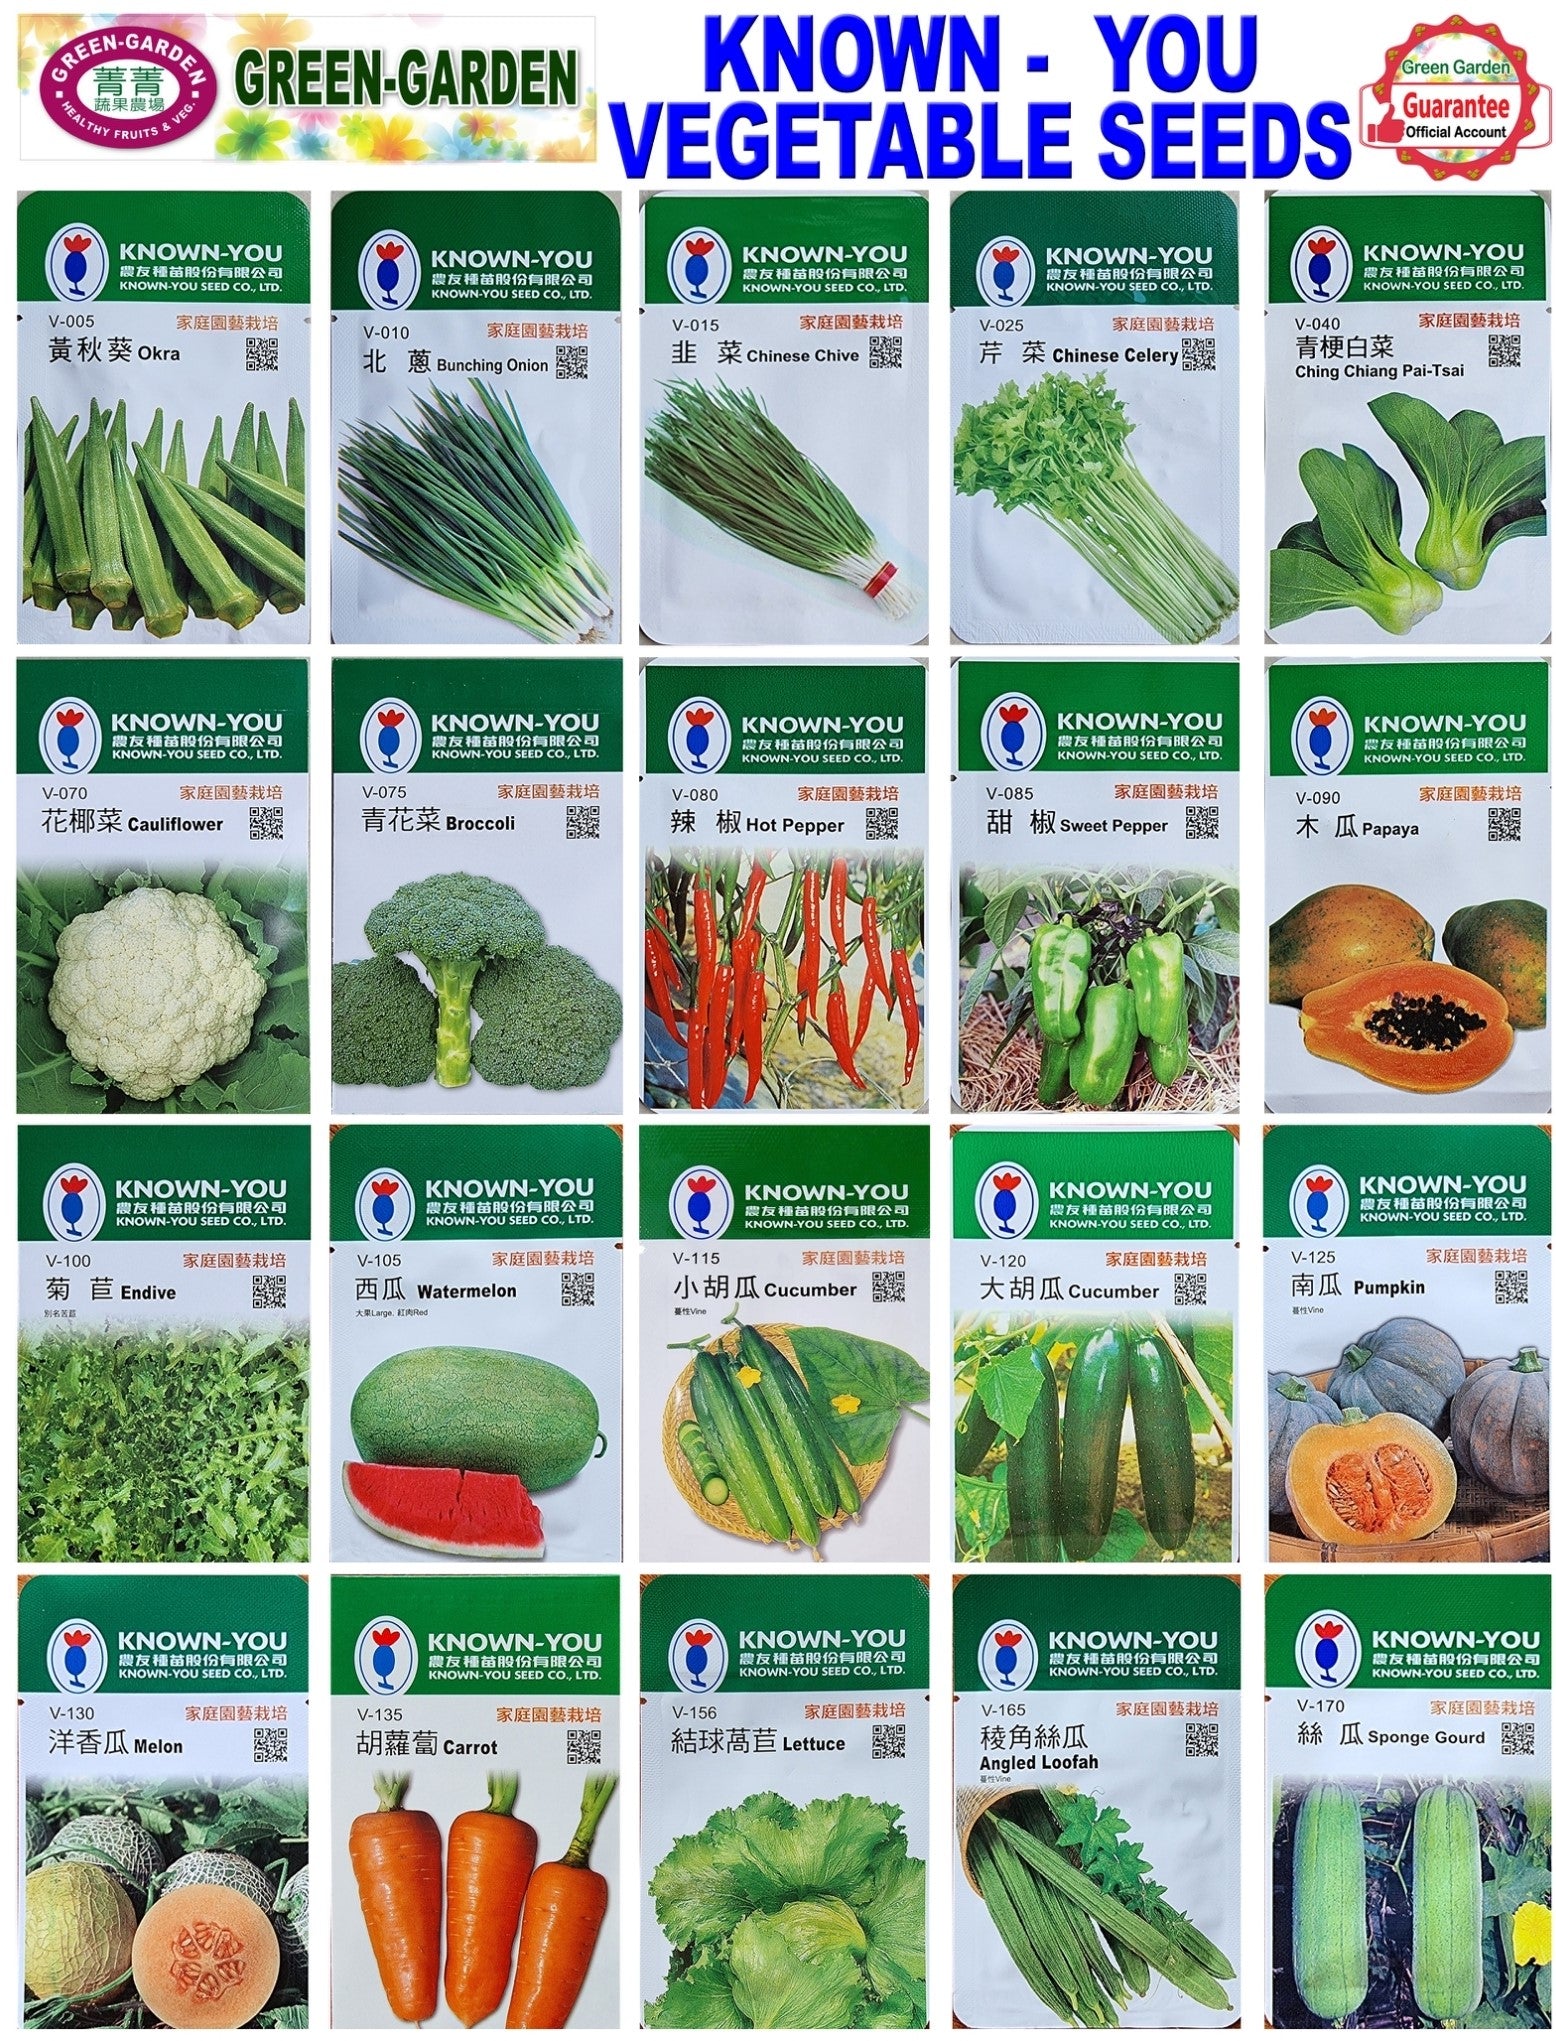 Known You Vegetable Seeds (V-180 Tomato)